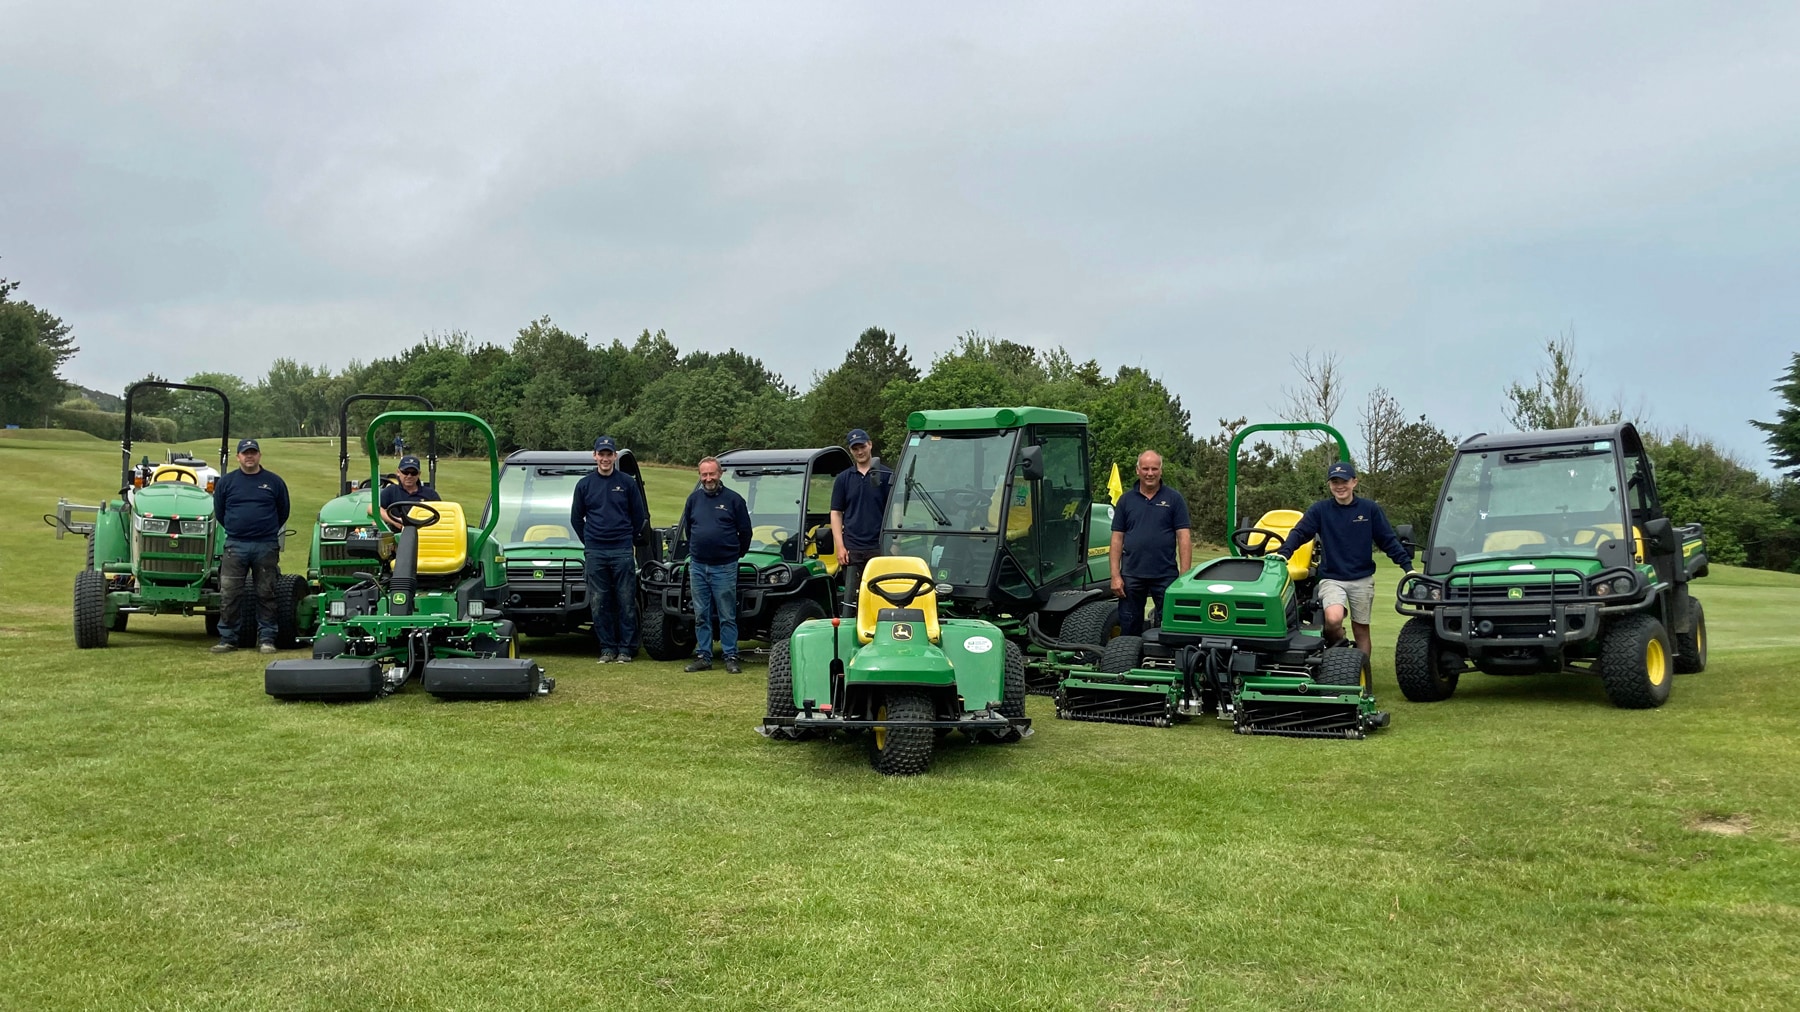 Golf and turf grounds staff at Potters Point holiday and golf resort with their new fleet of John Deere equipment.